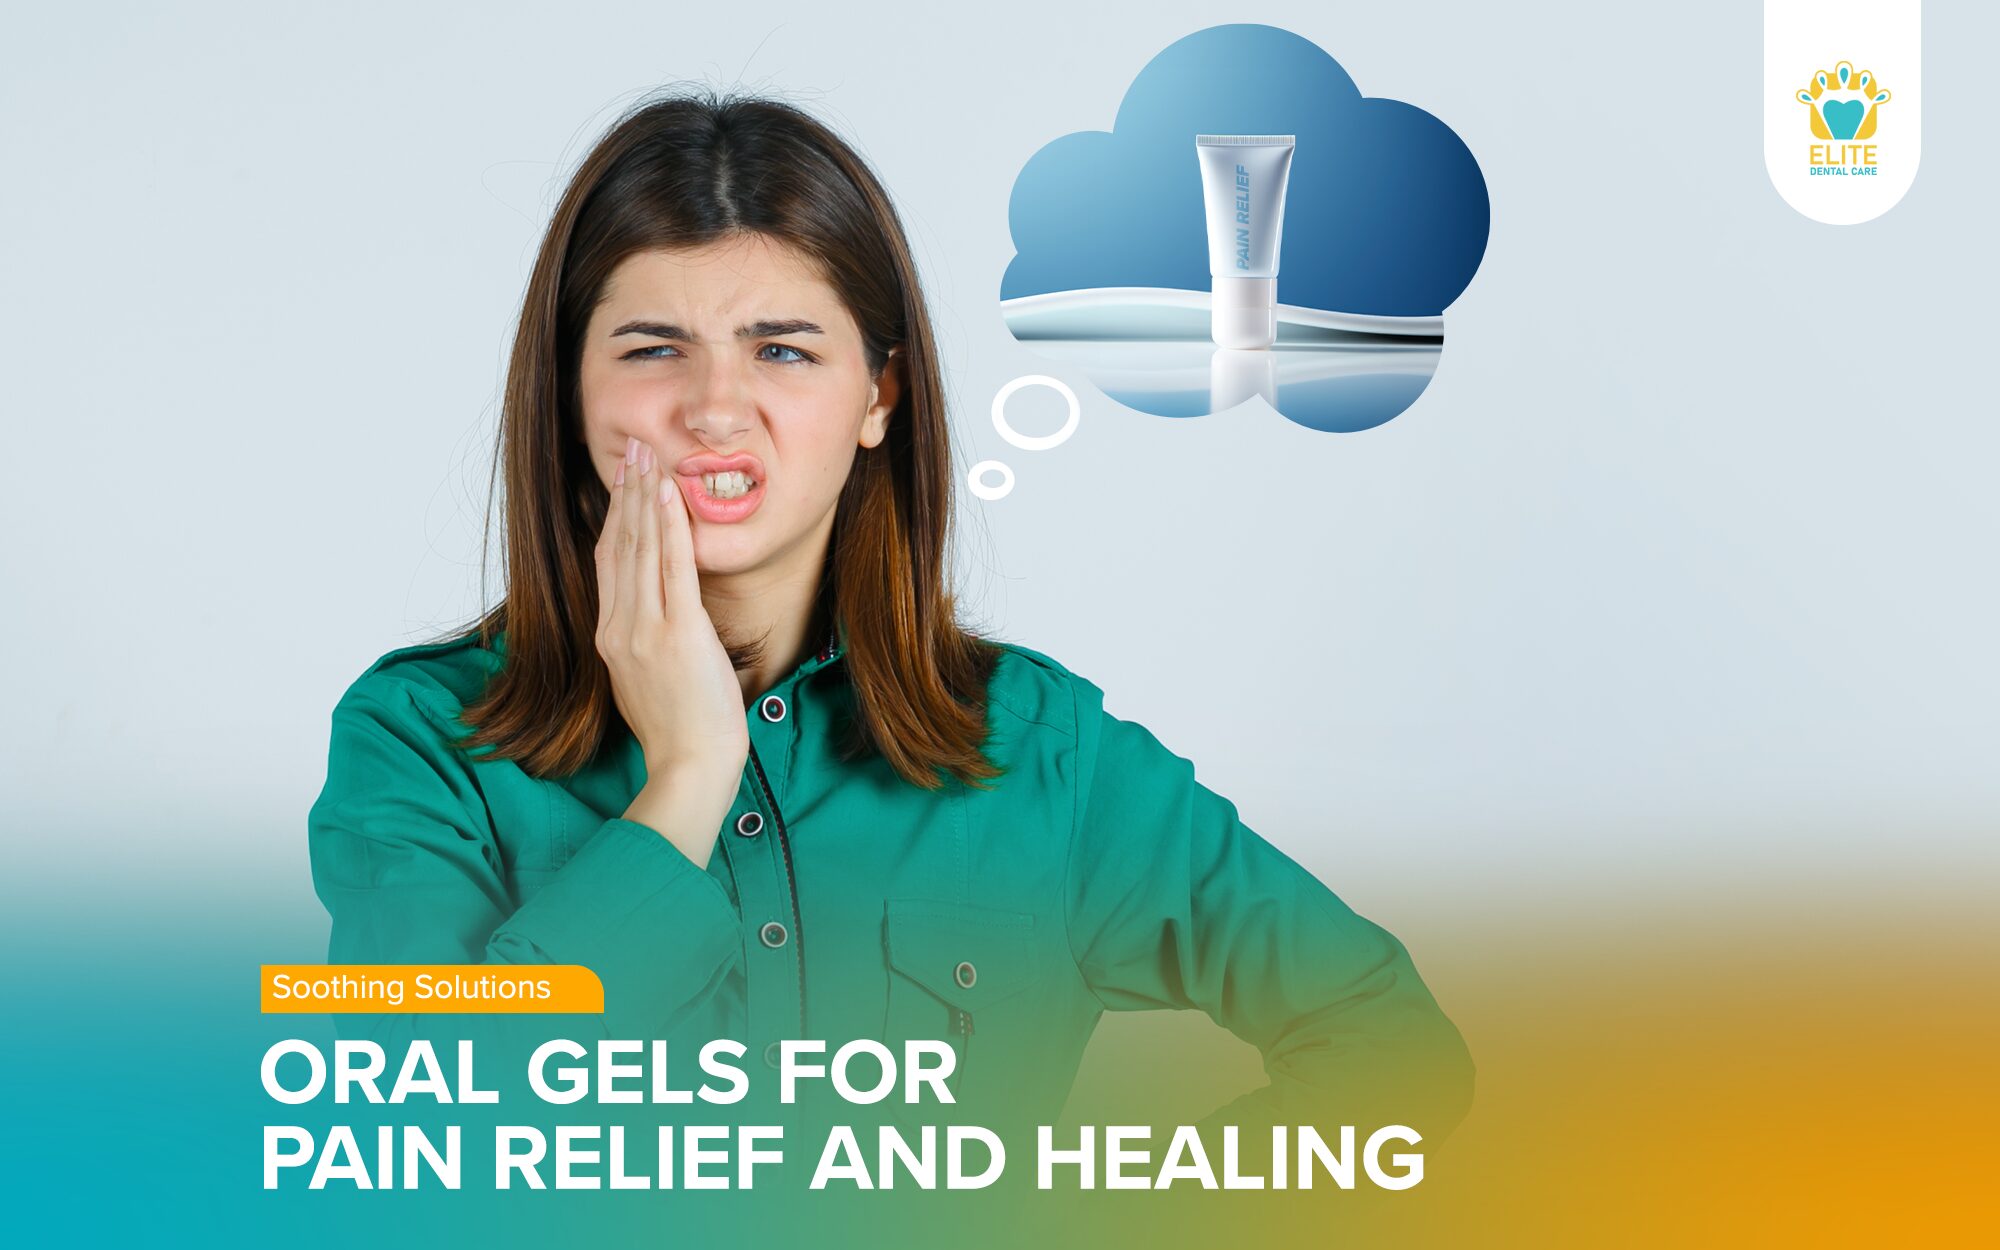 Soothing Solutions: Oral Gels for Pain Relief and Healing